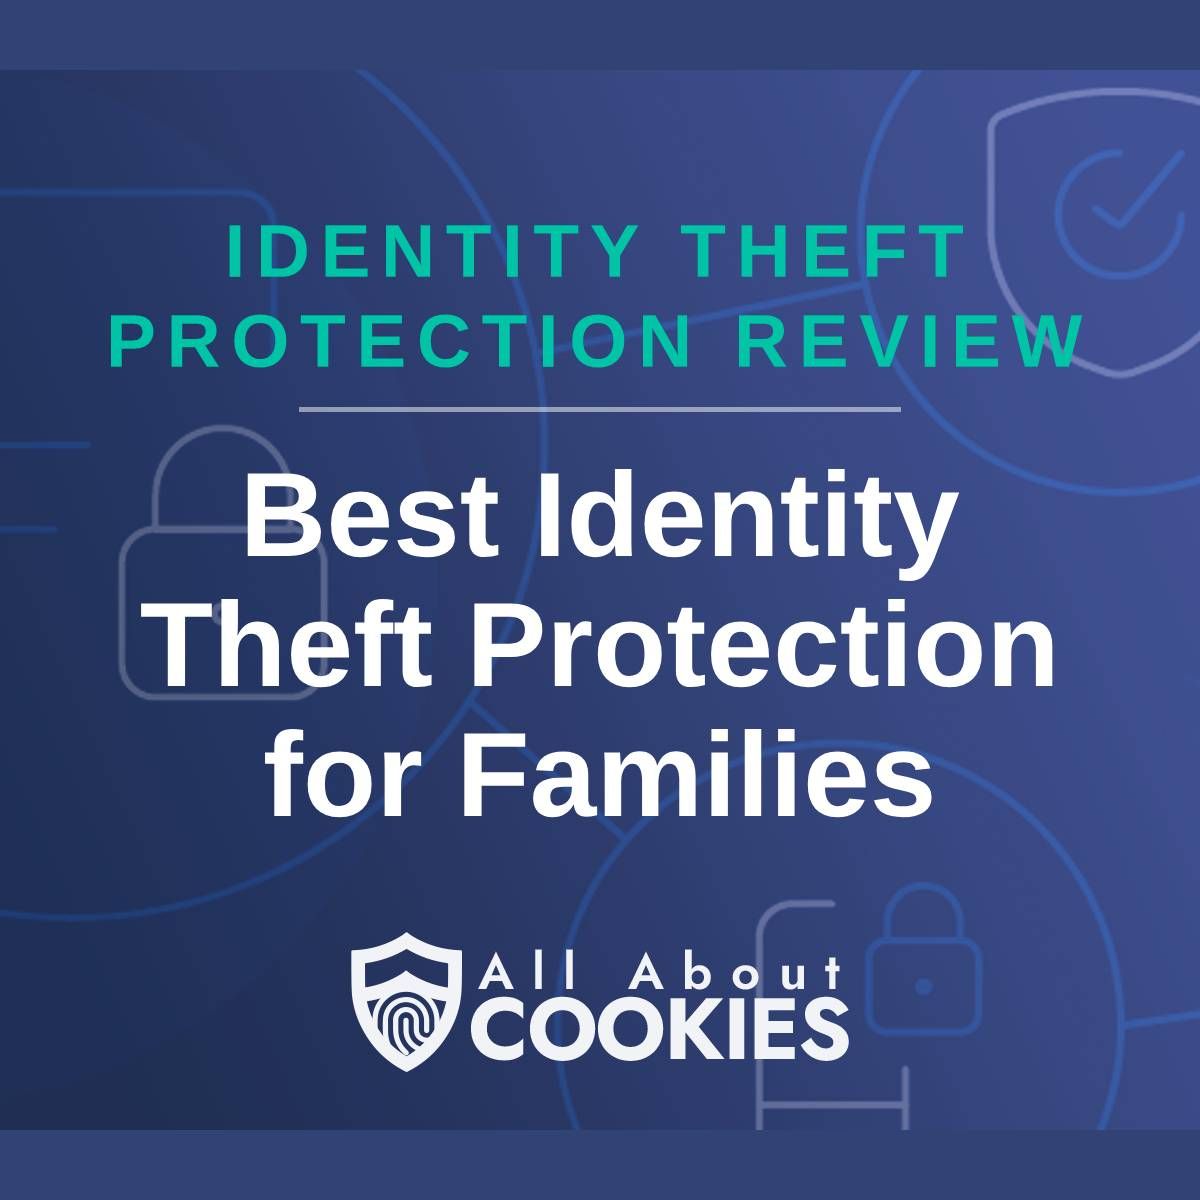 A blue background with images of locks and shields with the text &quot;Identity Theft Protection Review Best Identity Theft Protection for Families&quot; and the All About Cookies logo. 